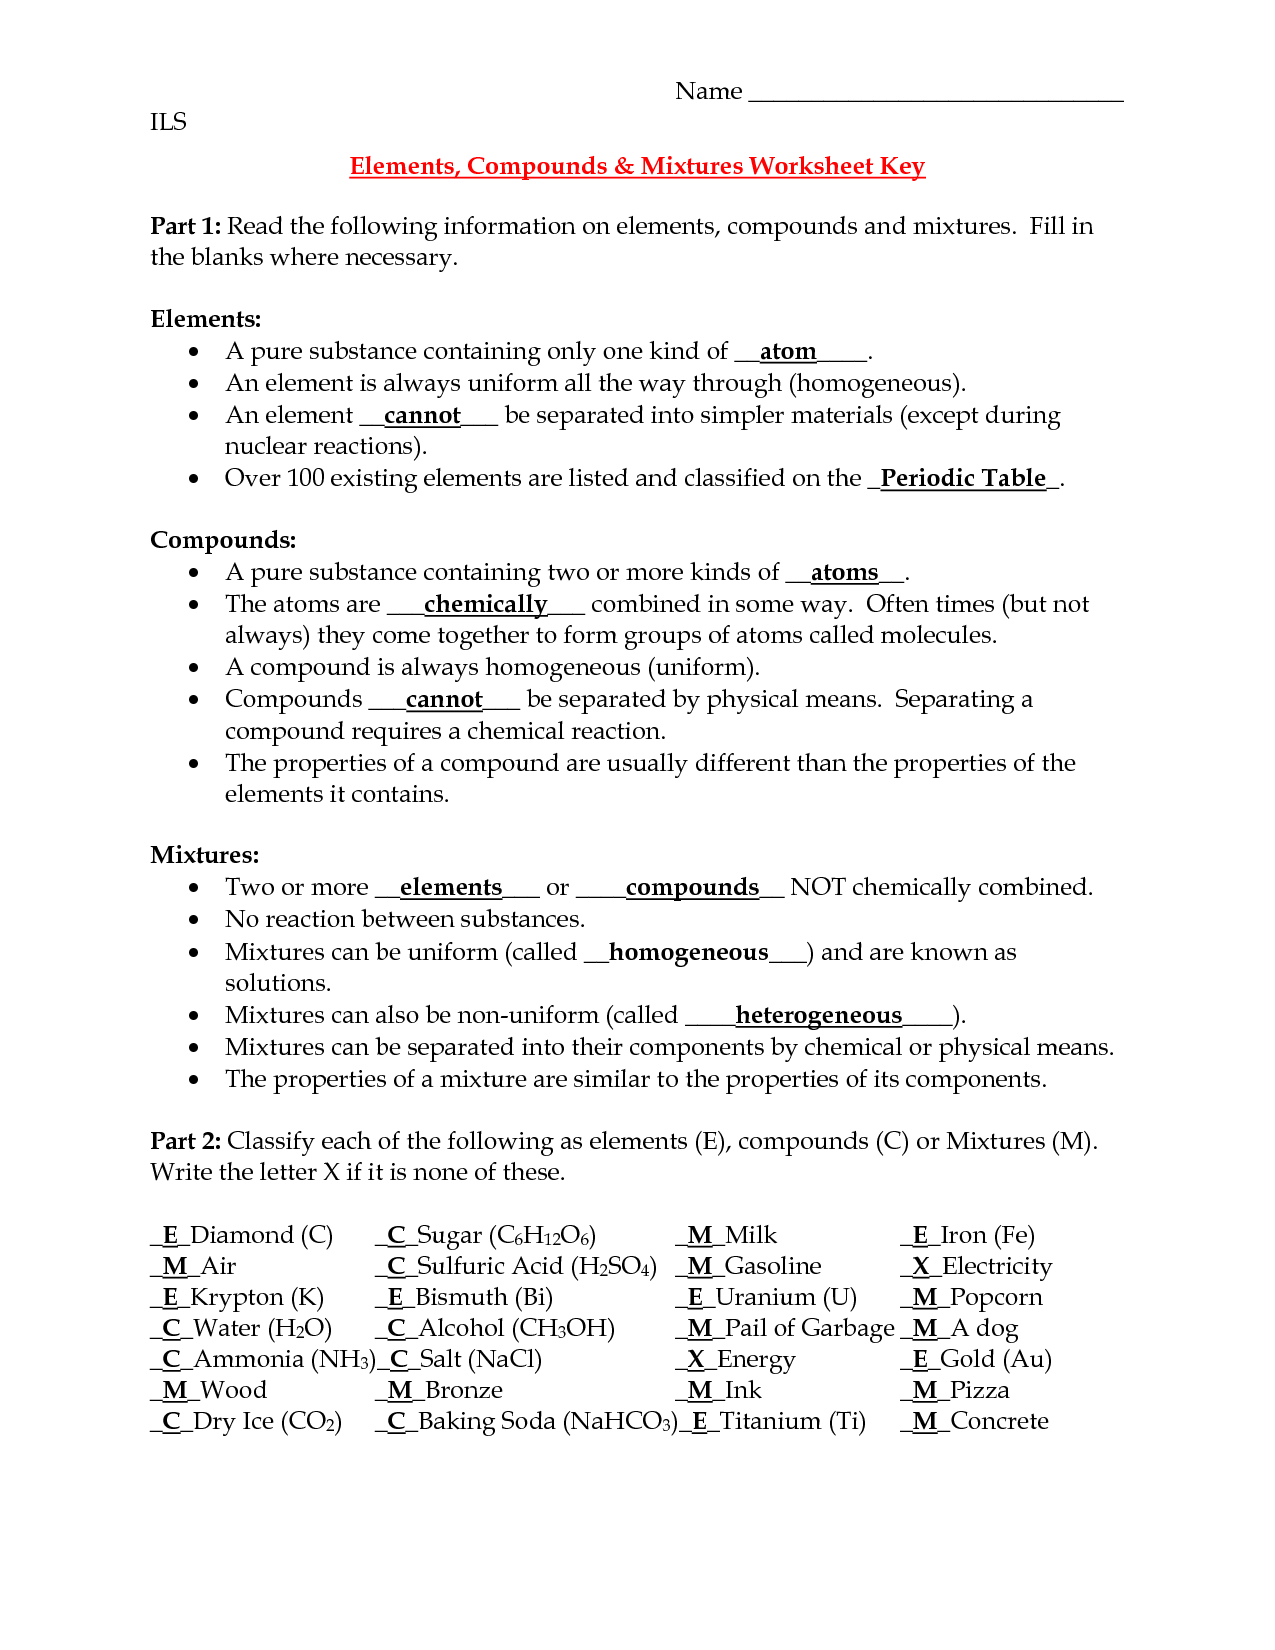 17-elements-compounds-and-mixtures-worksheet-answer-key-worksheeto